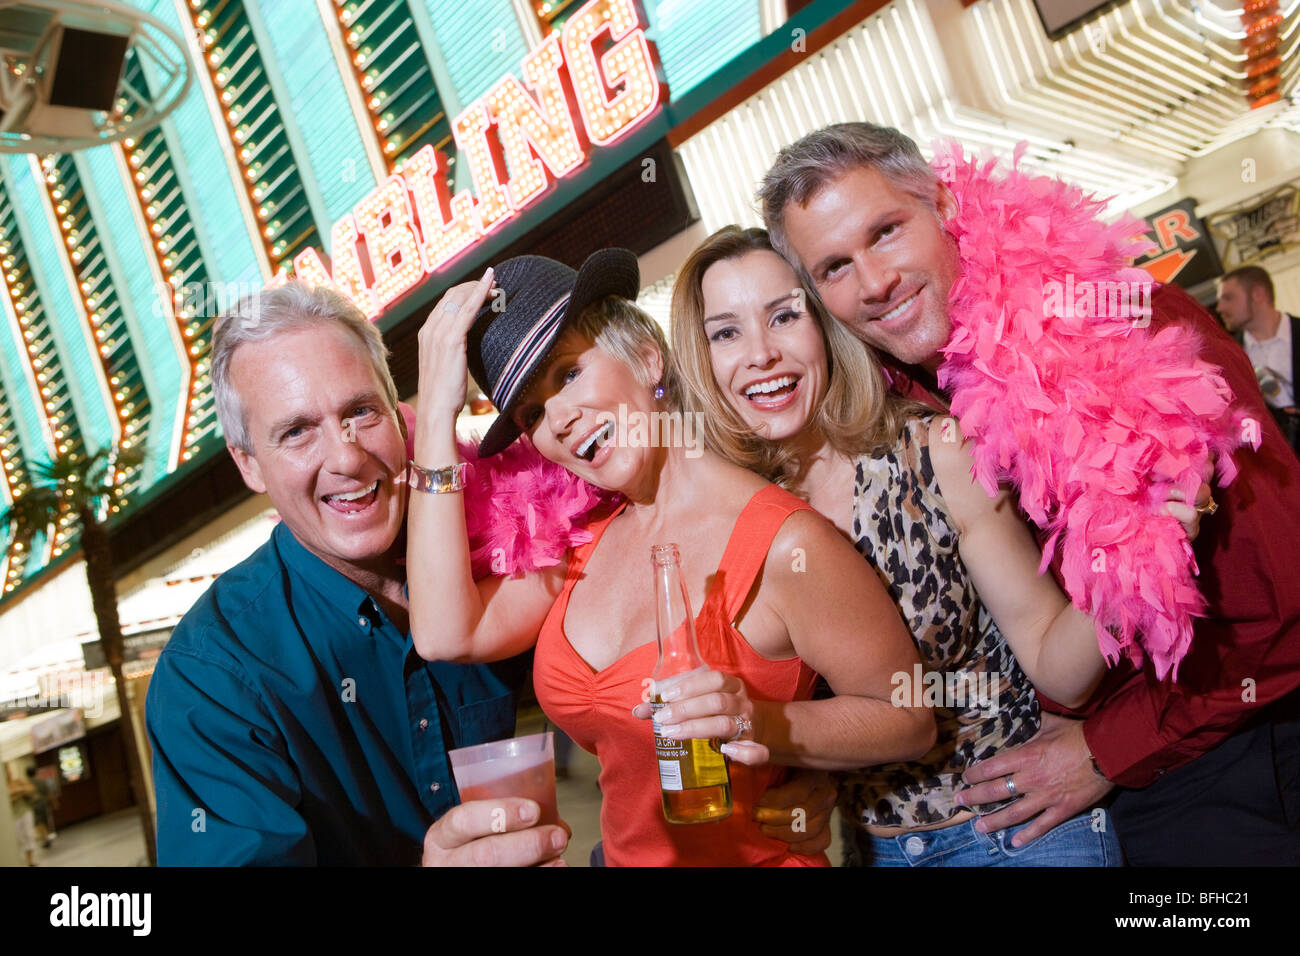 Two men and two women in front of casino building, portrait Stock Photo